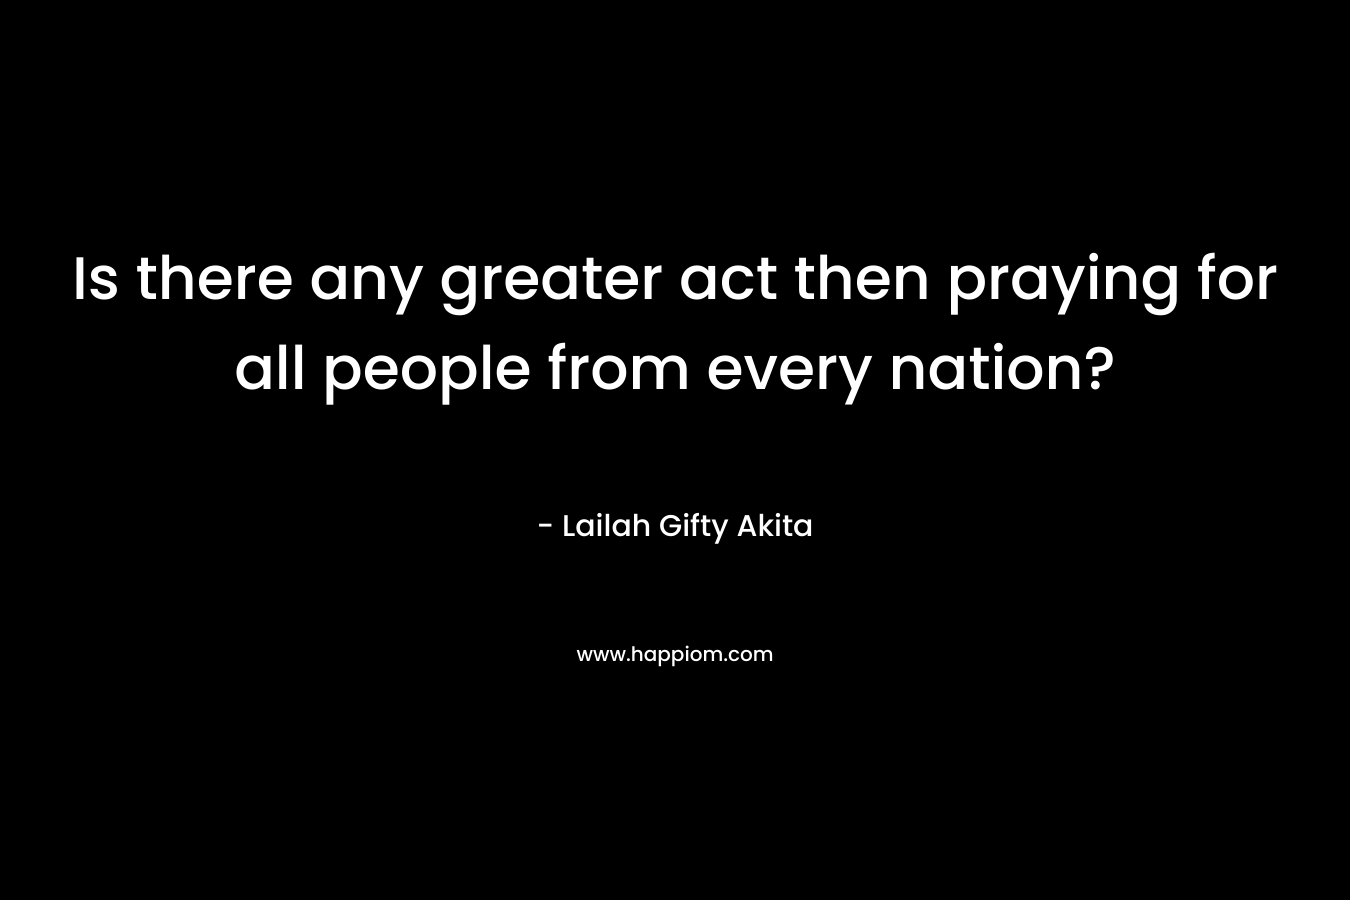 Is there any greater act then praying for all people from every nation?